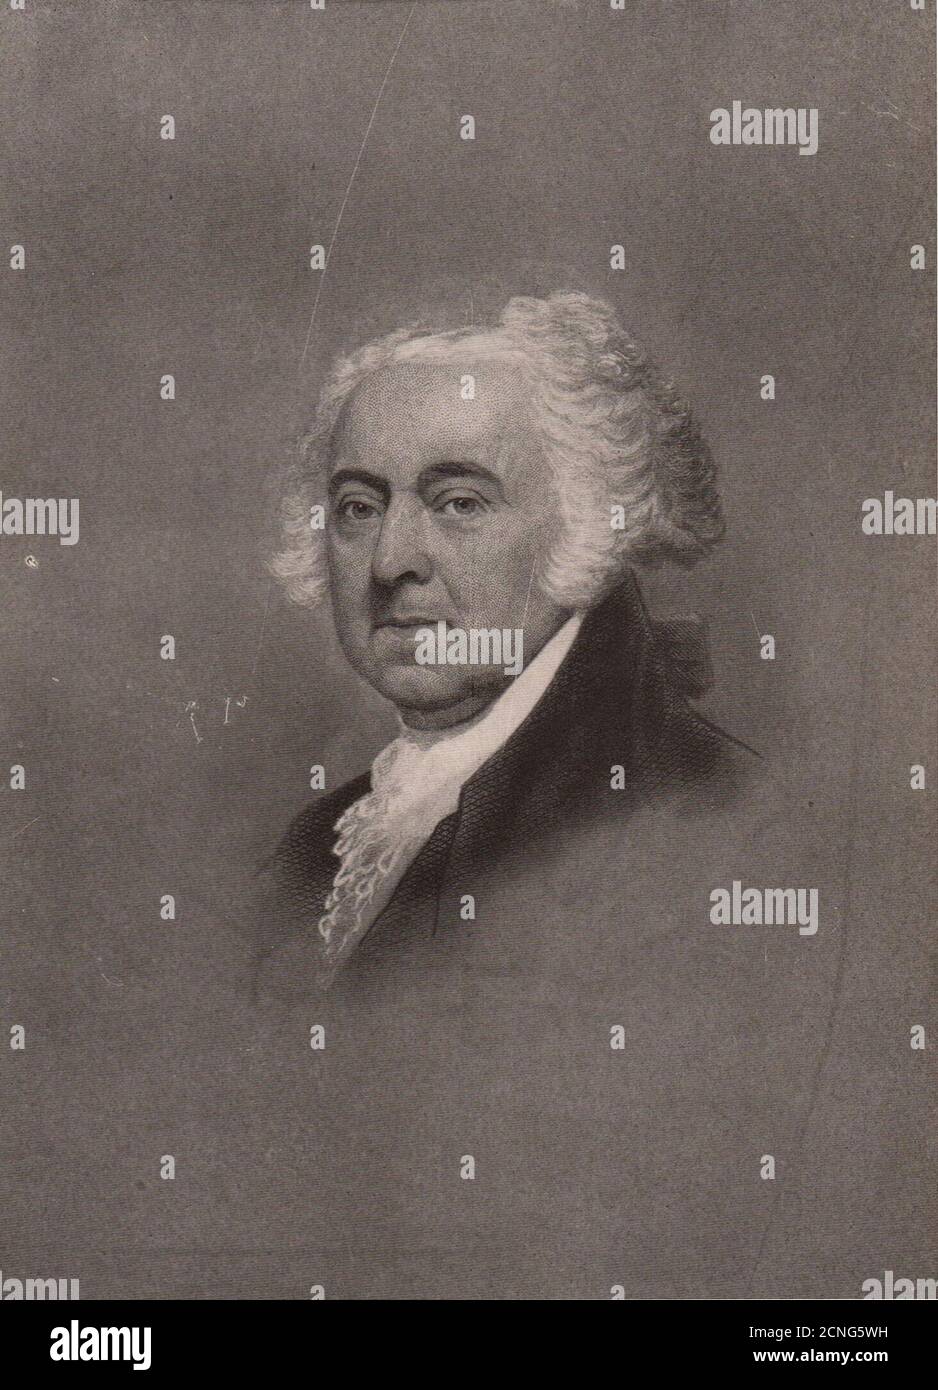 Head-and-Shoulders Portrait Second President of The United States of America John Adams Facing Slightly Right. Historic Photos 1814 Photo John Adams